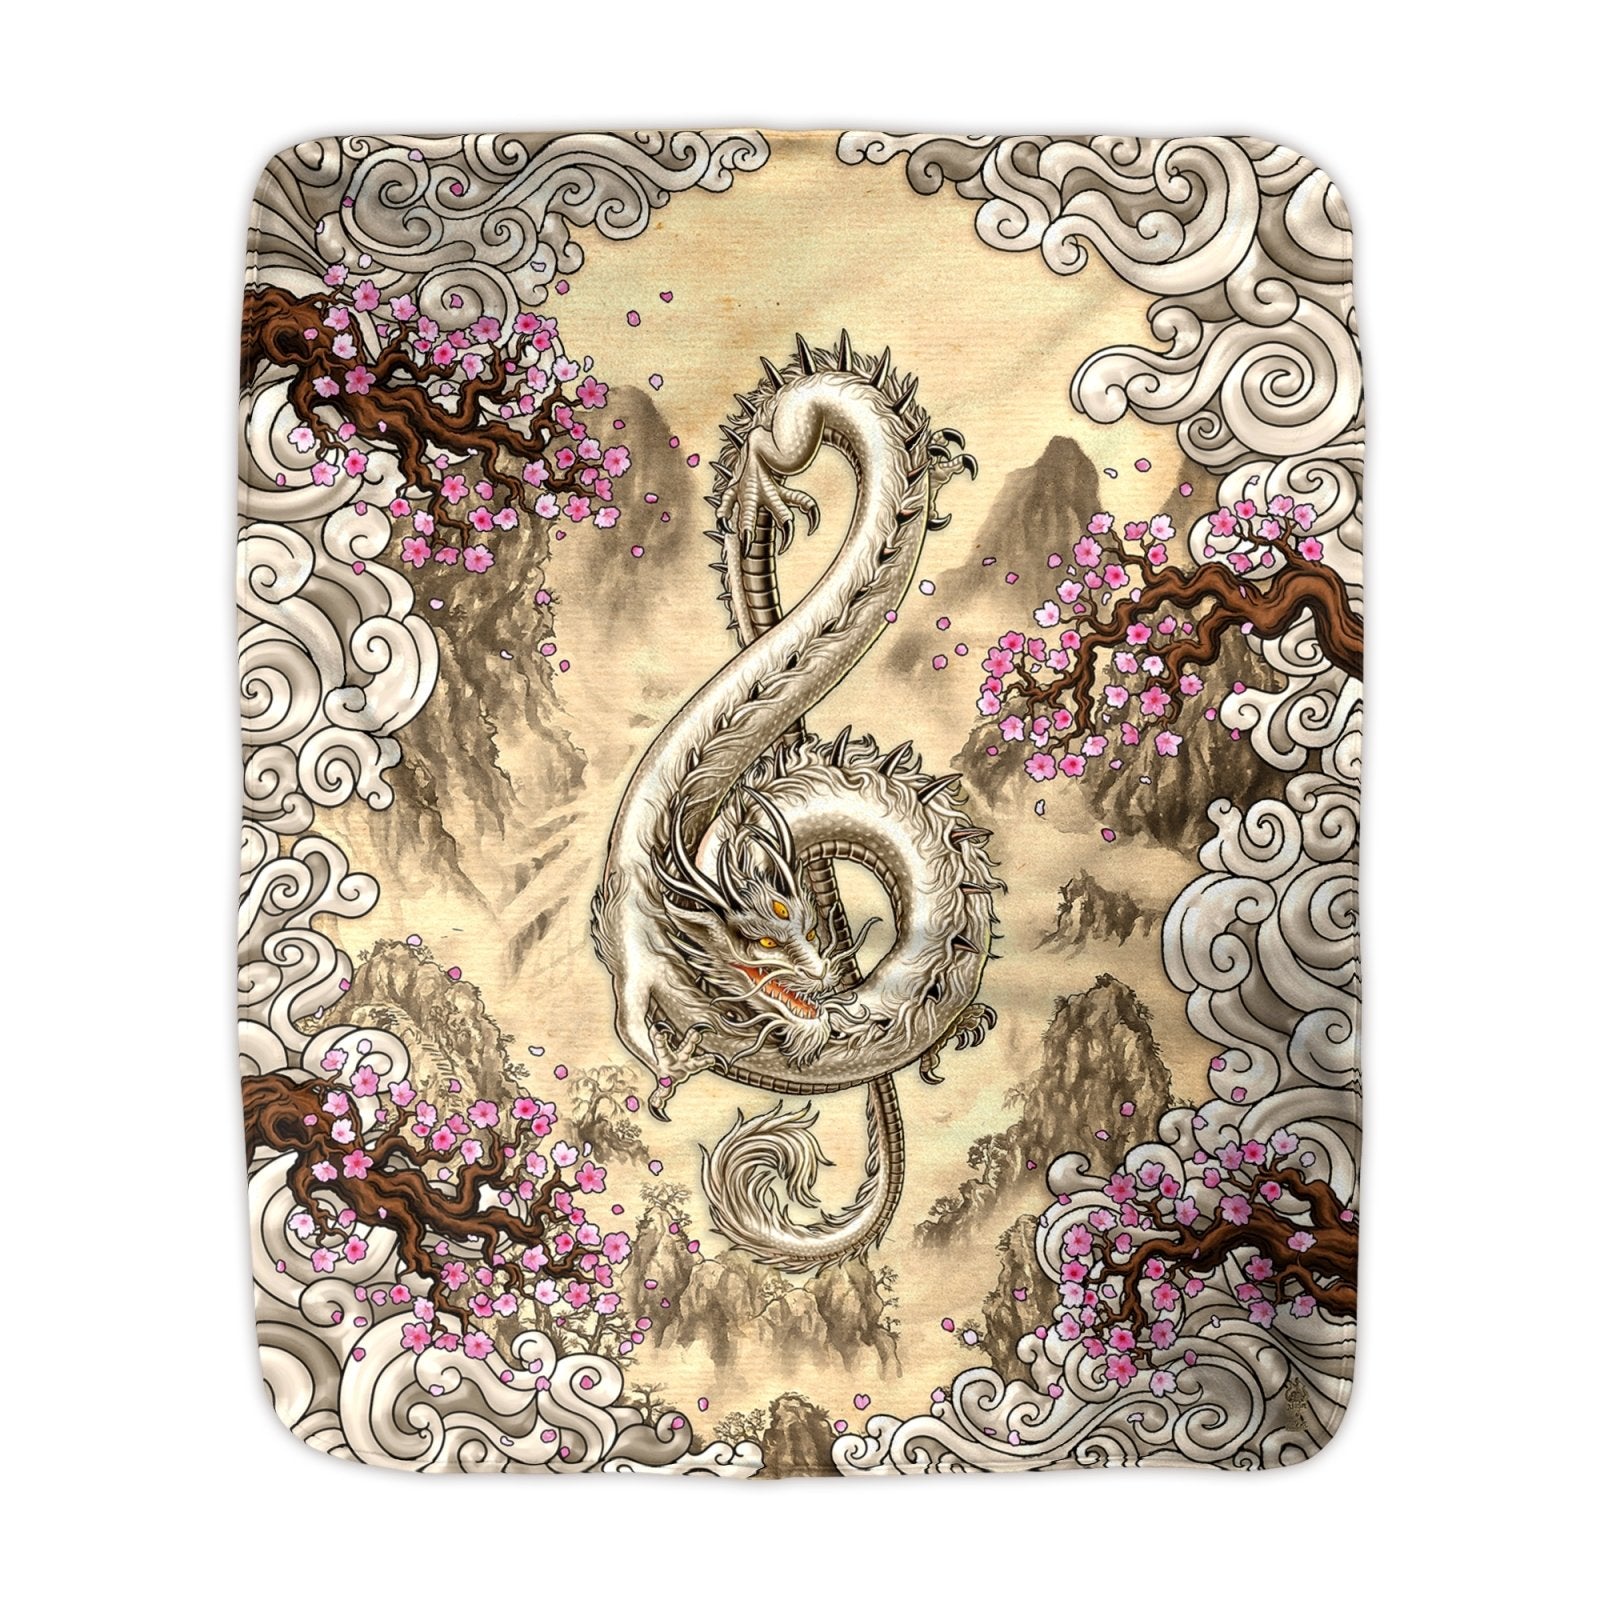 Chinese Dragon Throw Fleece Blanket, Treble Clef, Music Art, Asian Decor, Eclectic and Funky Gift - Painting - Abysm Internal